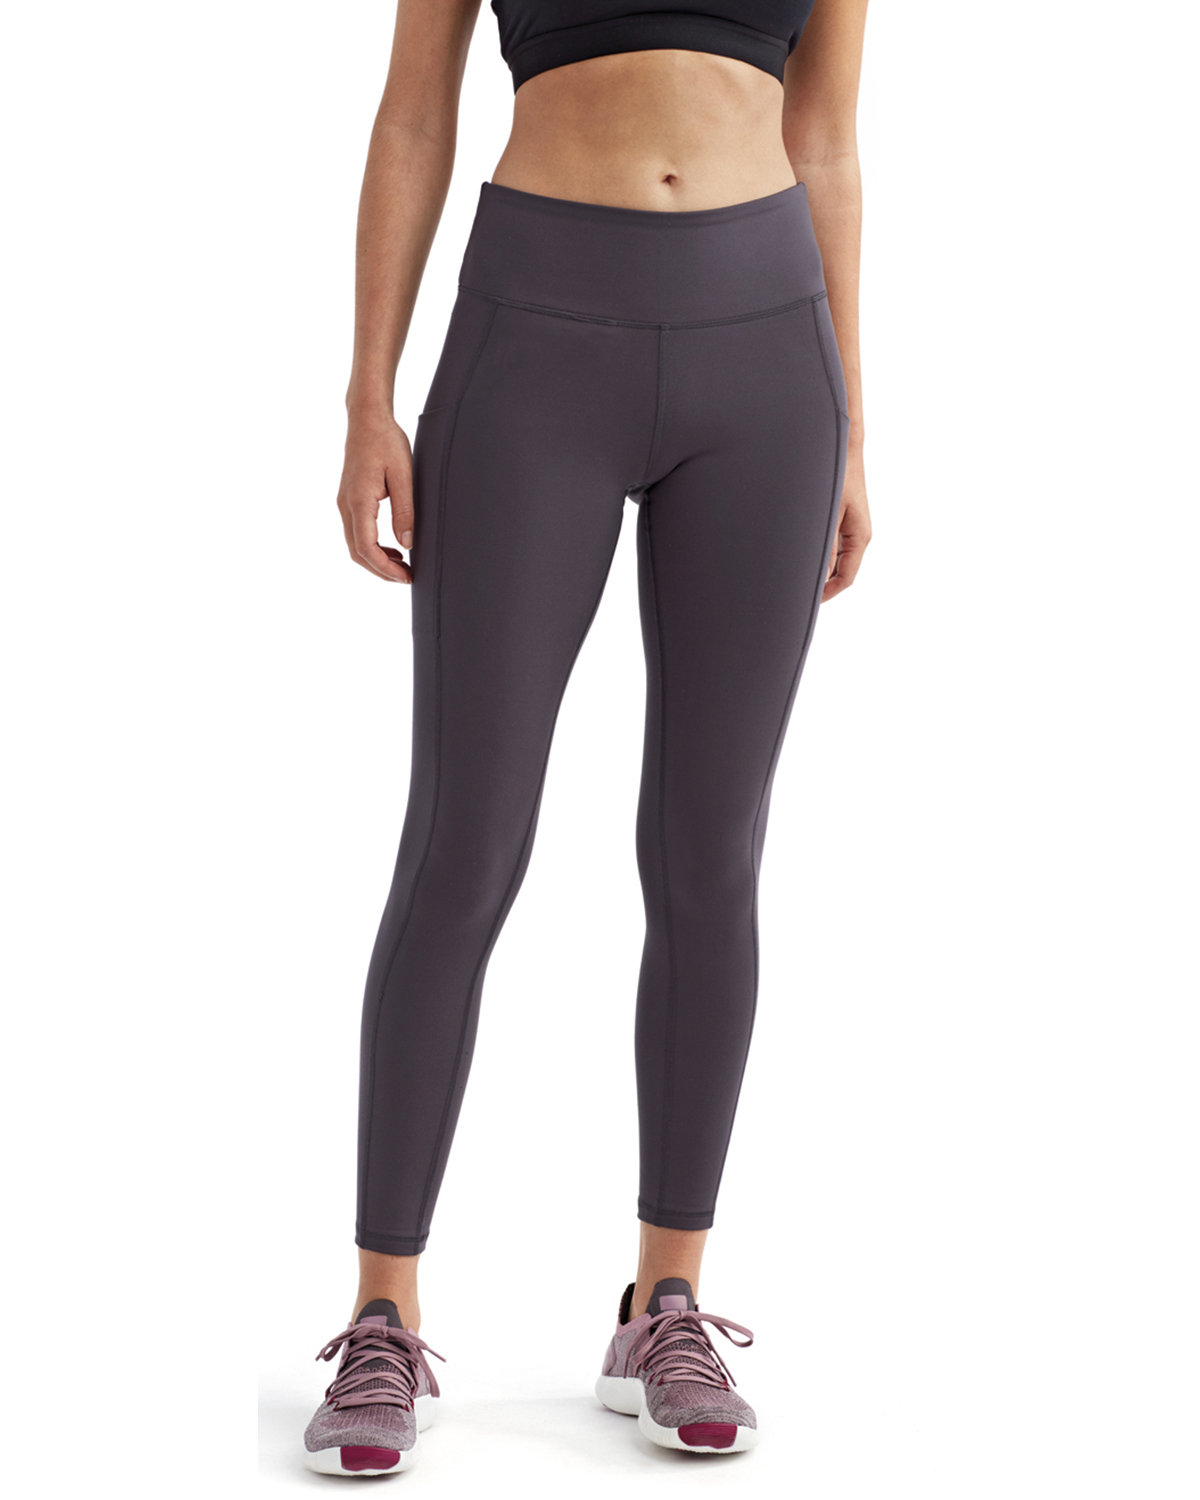 Women's Performance Side Pocket Tights - Wine Time